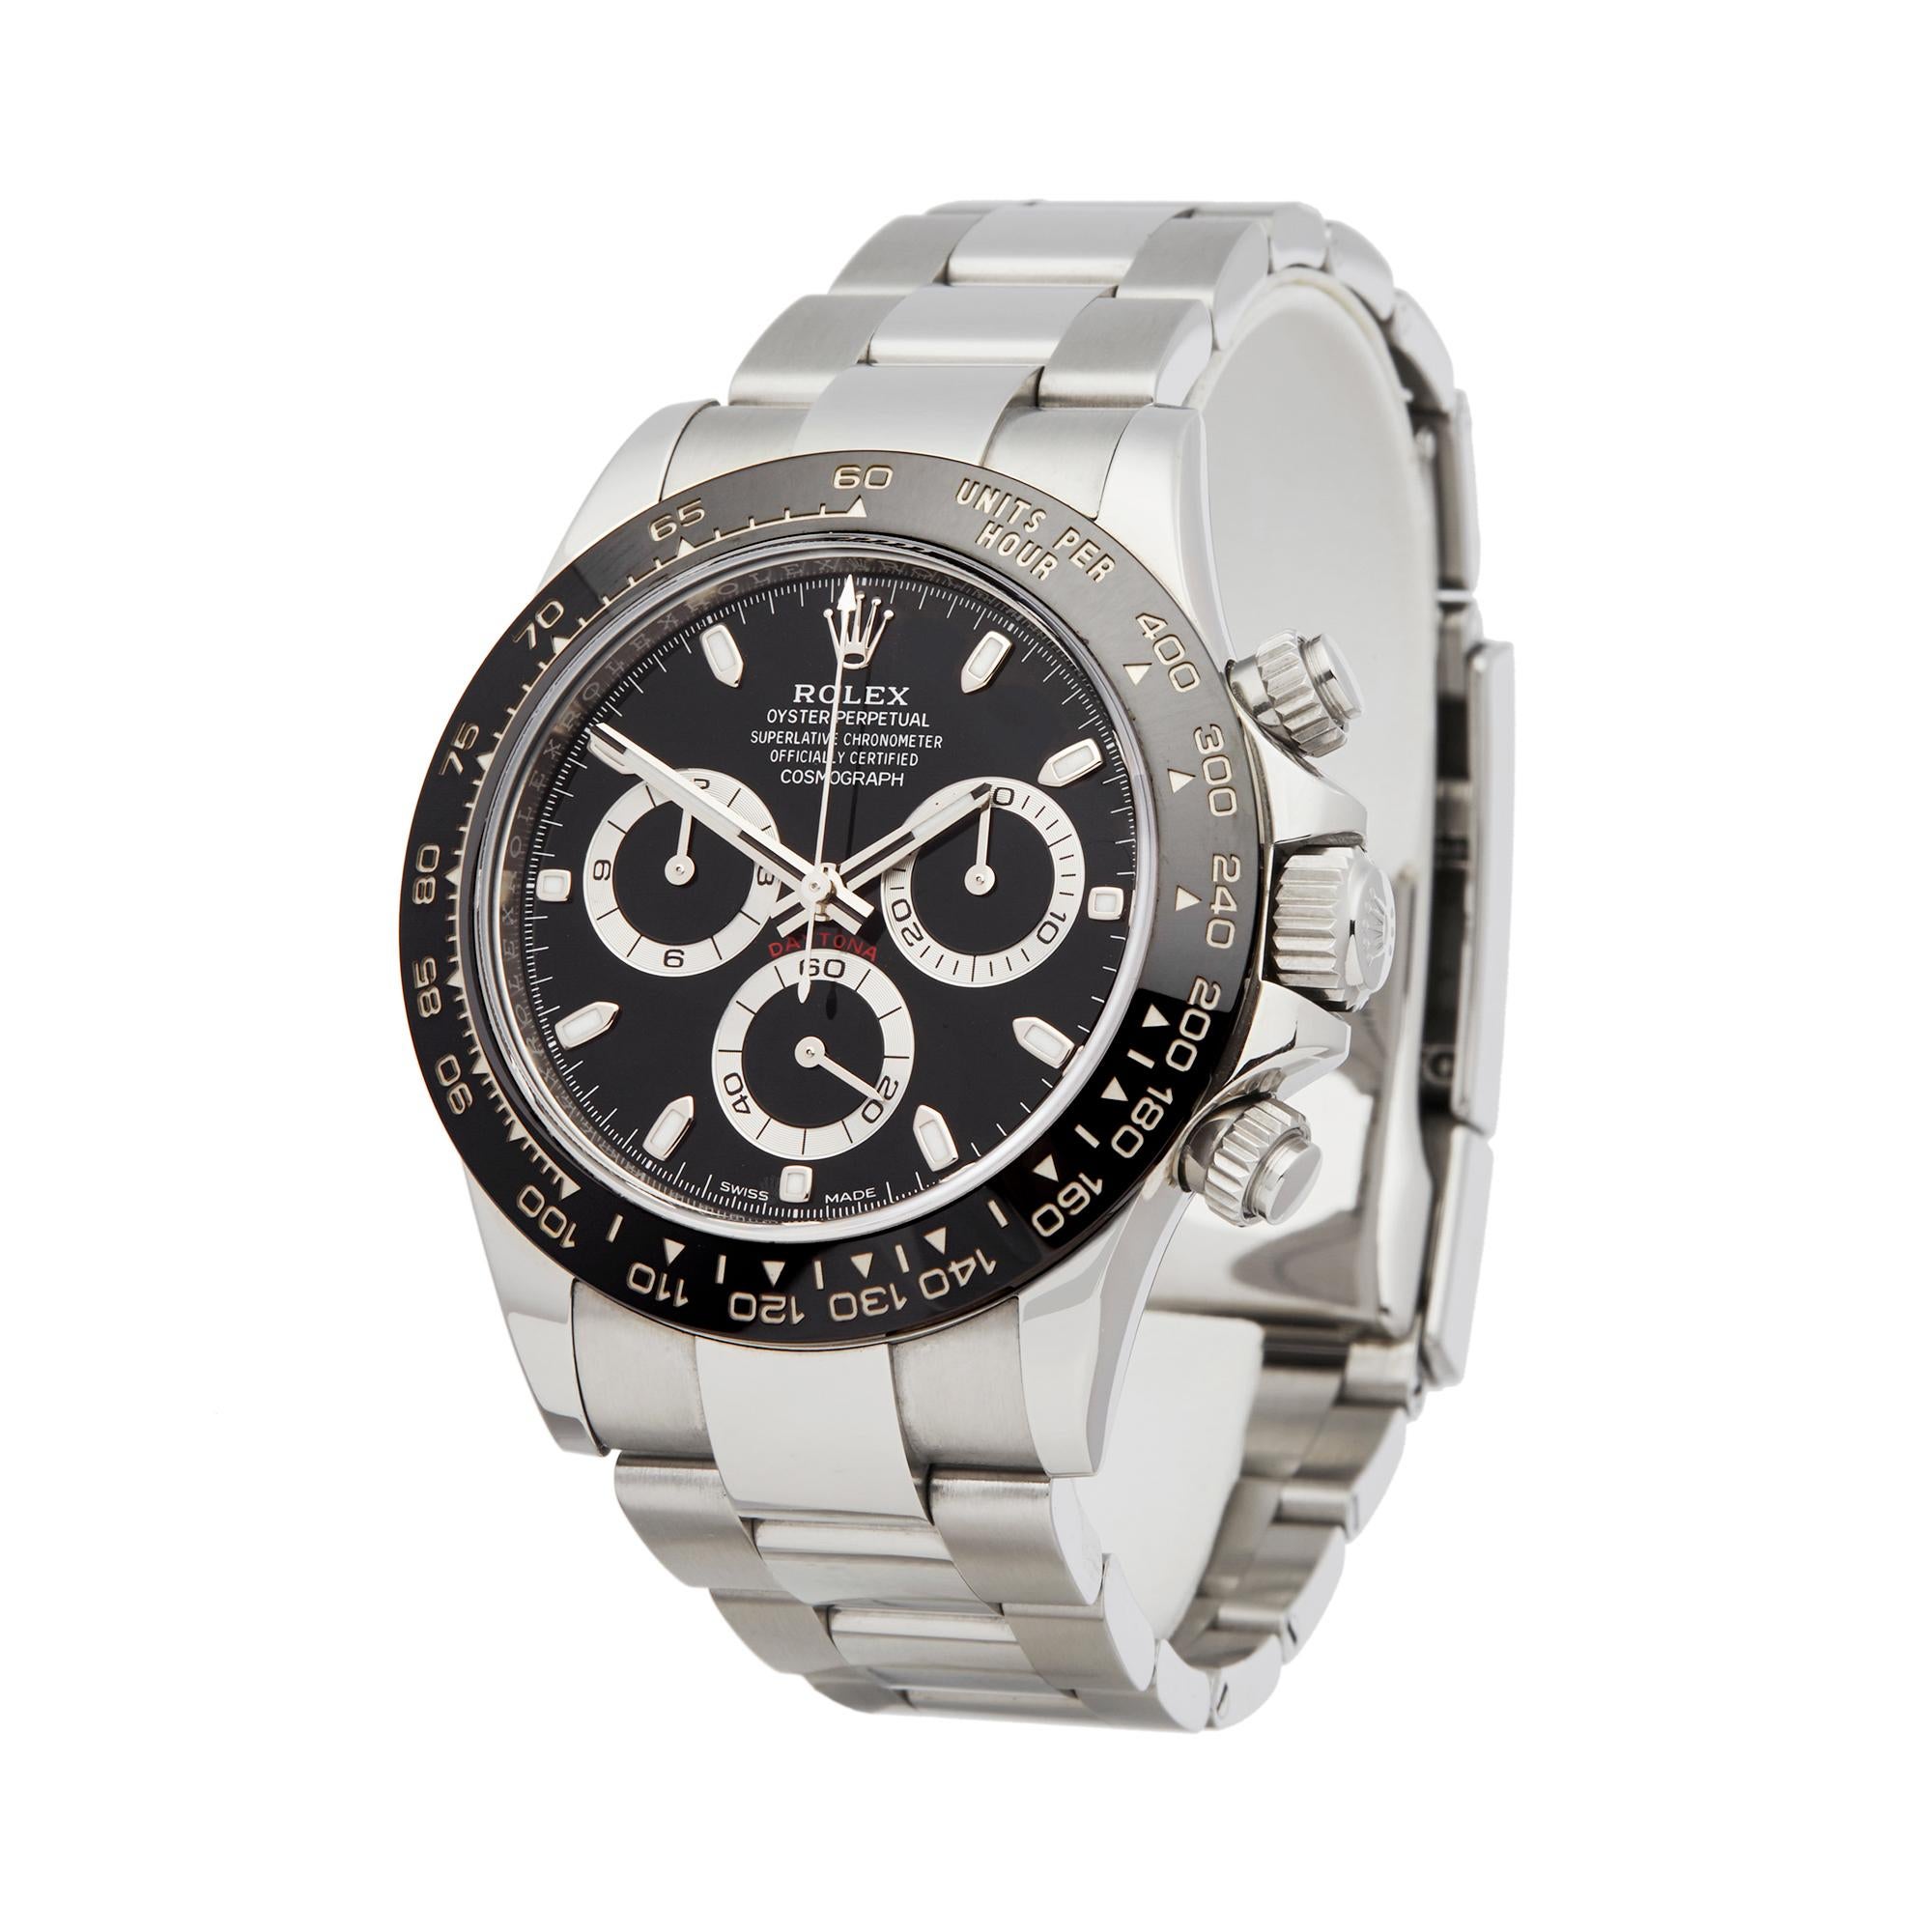 Reference: W5772
Manufacturer: Rolex
Model: Daytona
Model Reference: 116500LN
Age: 13th November 2016
Gender: Men's
Box and Papers: Box, Manuals and Guarantee
Dial: Black Baton
Glass: Sapphire Crystal
Movement: Automatic
Water Resistance: To